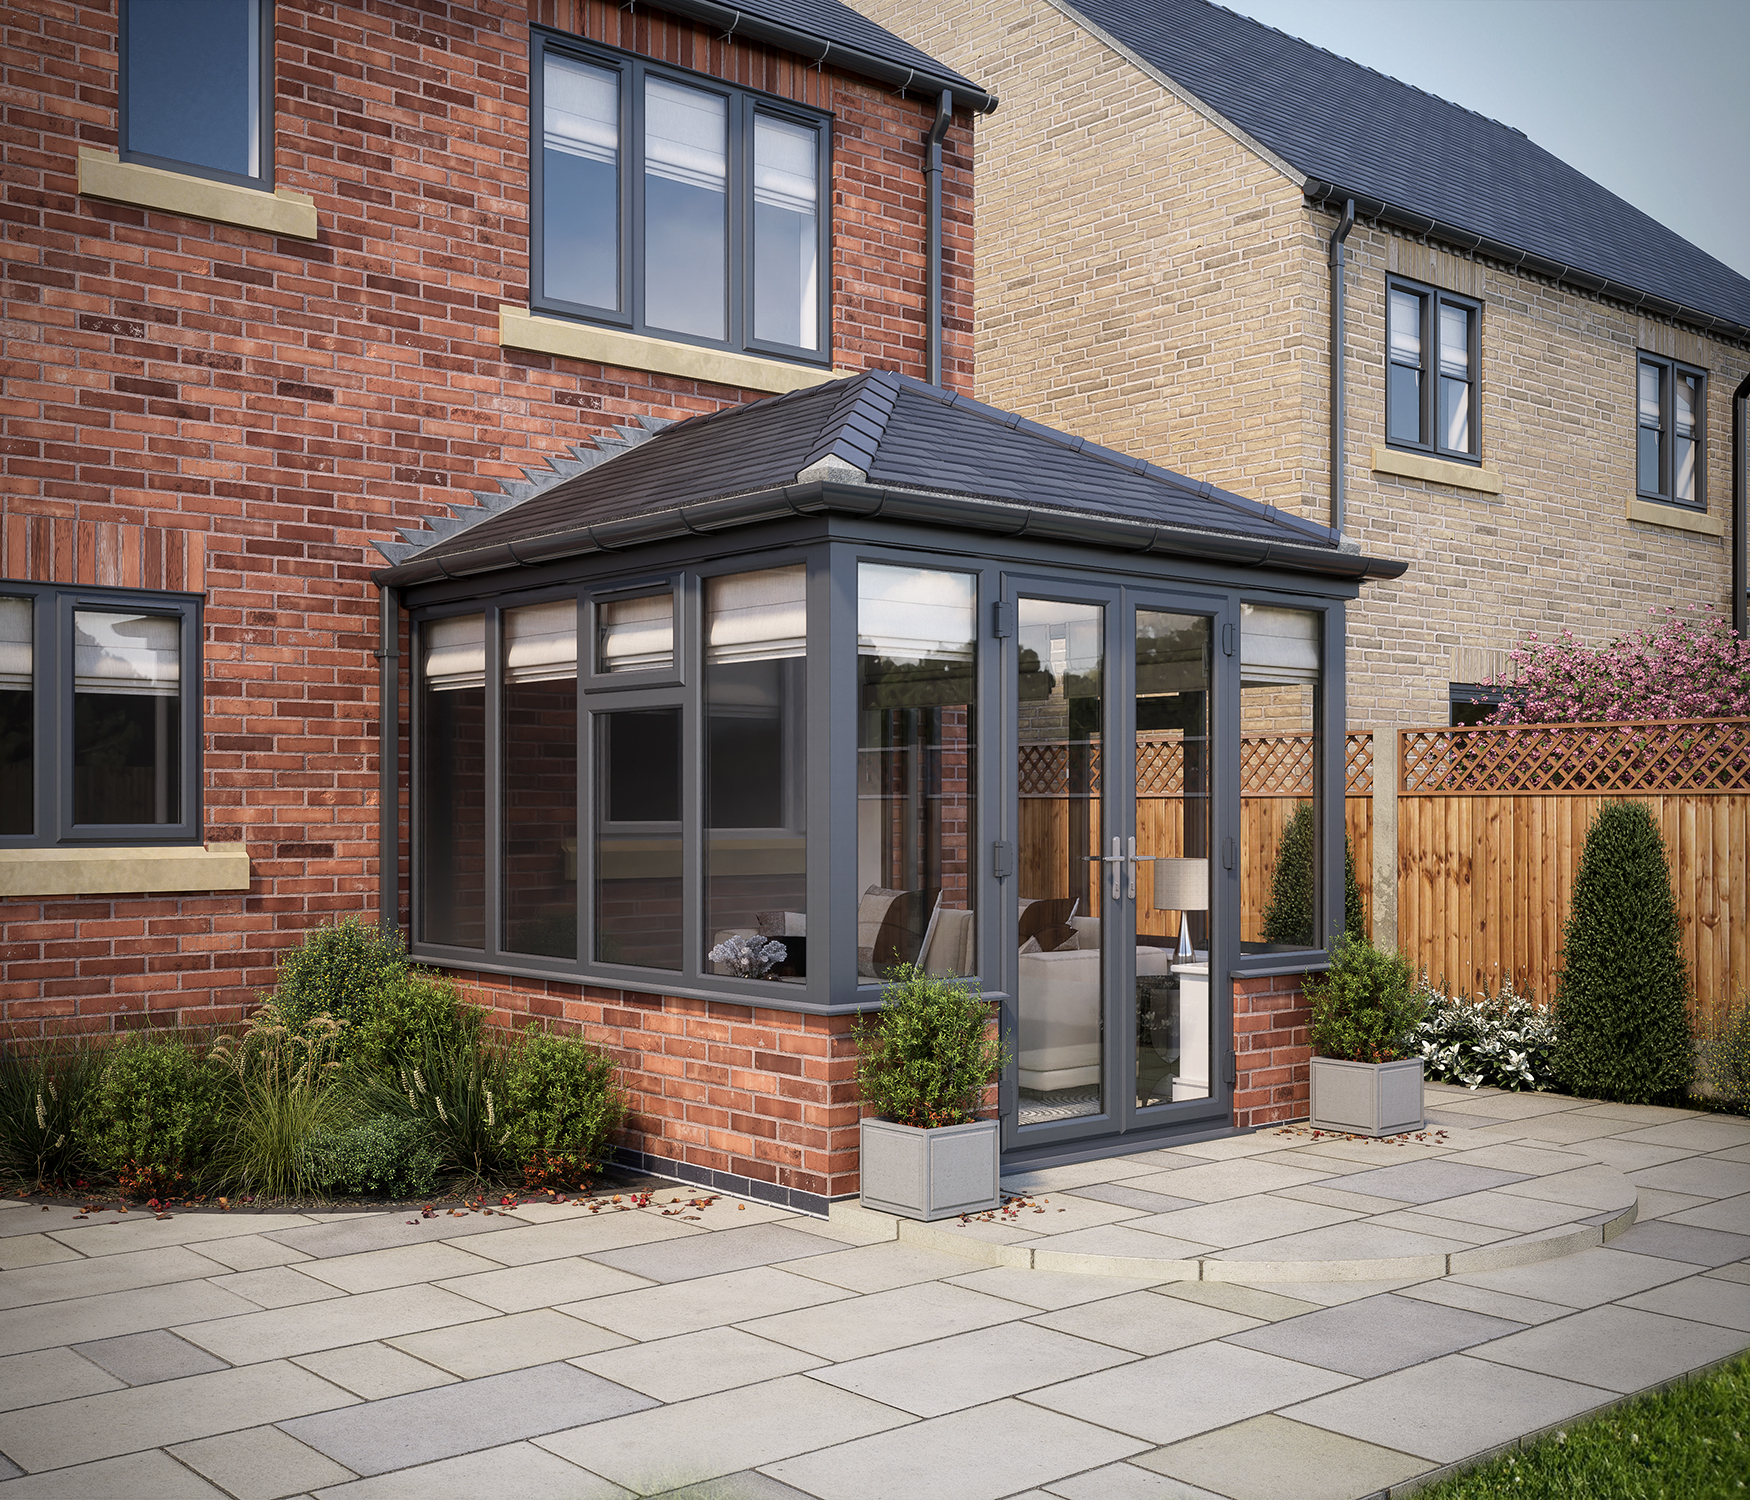 SOLid Roof Edwardian Conservatory Grey Frames Dwarf Wall with Titanium Grey Tiles - 13 x 10ft